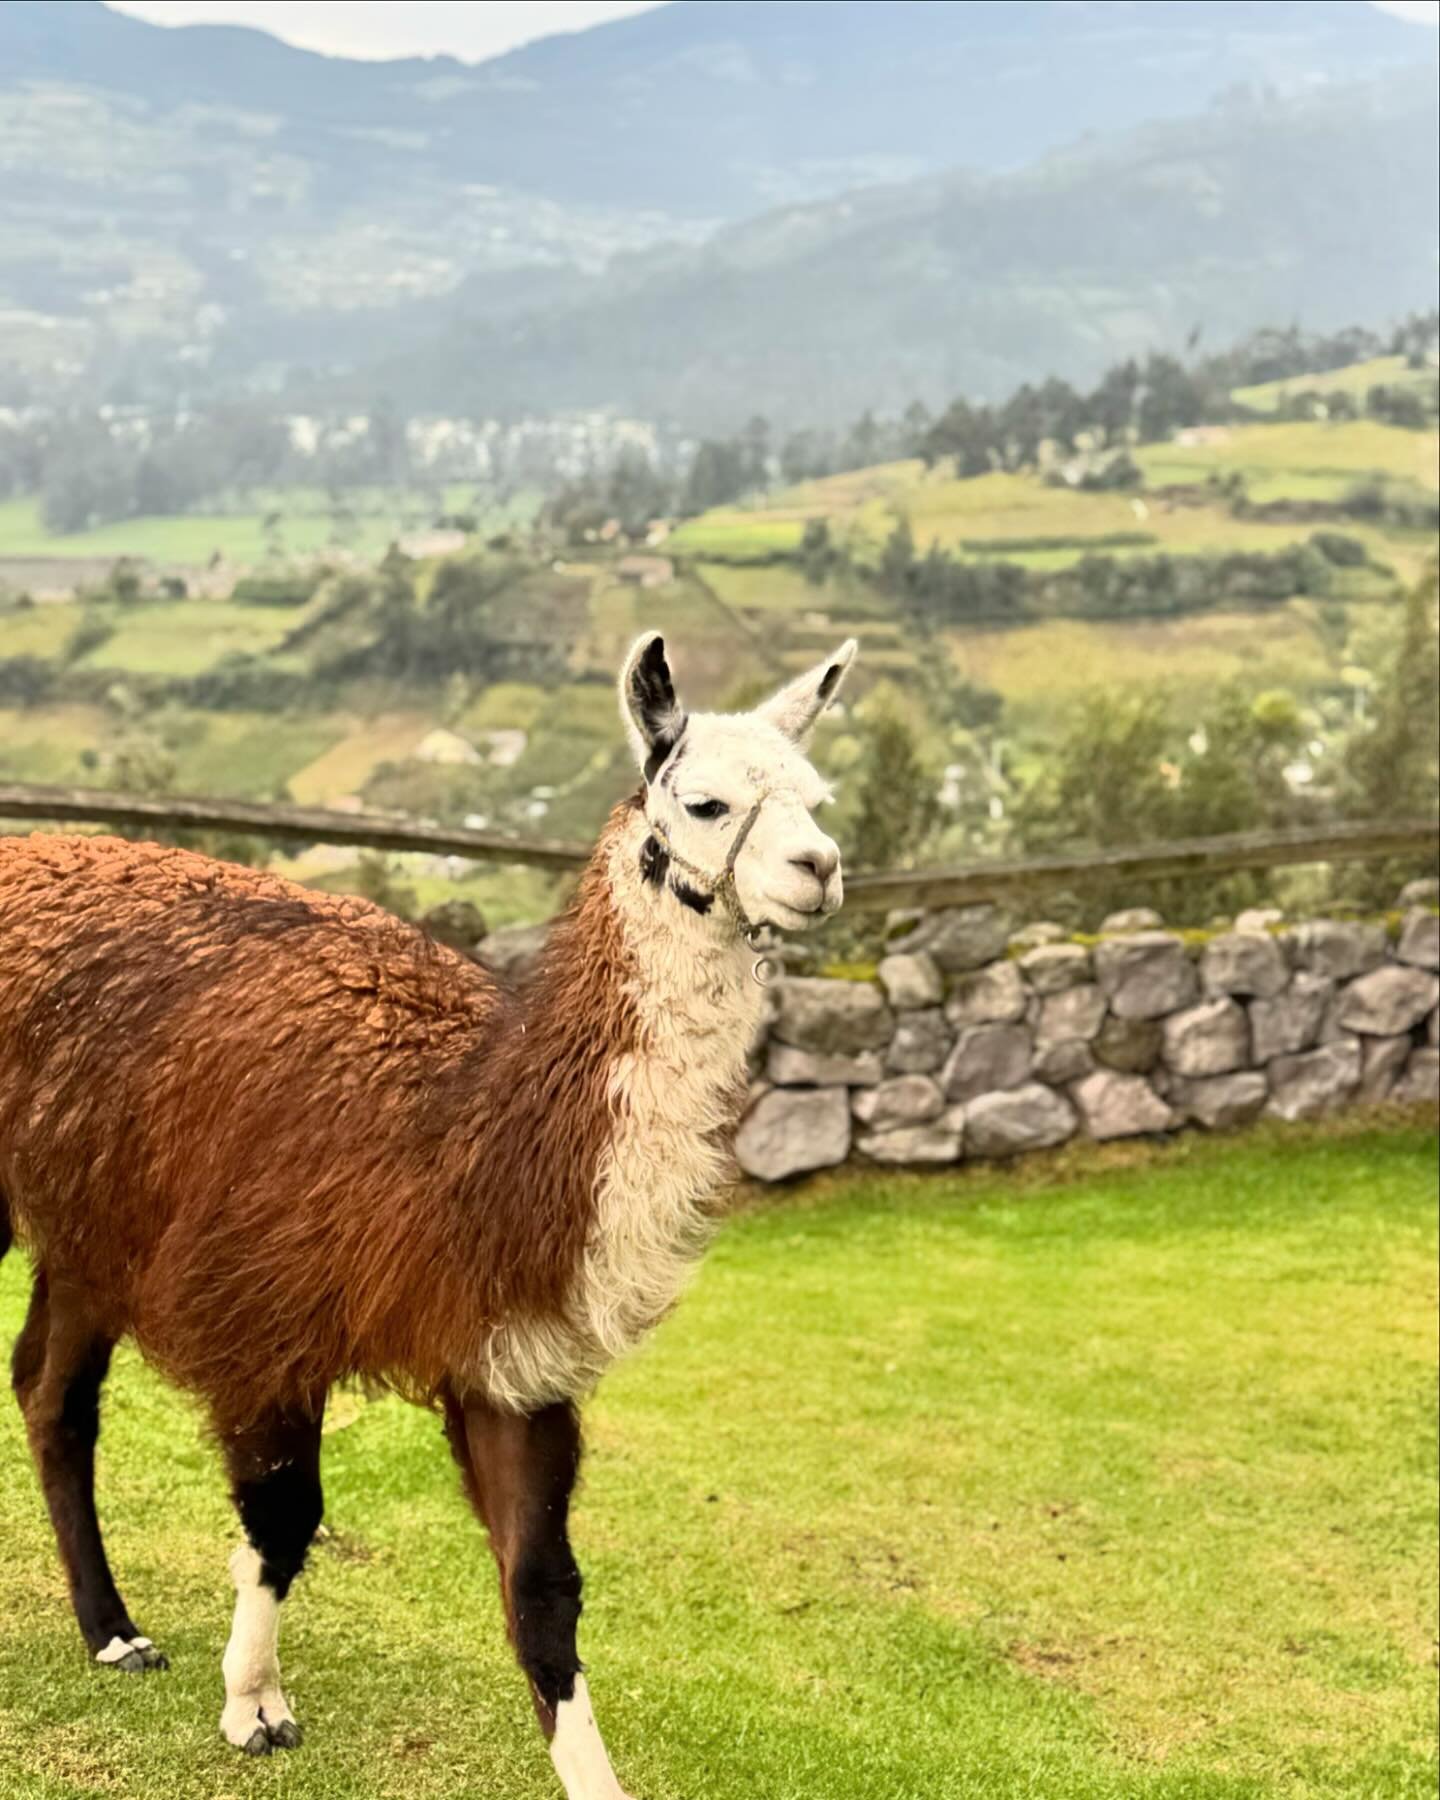 Took a break from posting to go on some amazing adventures 🦙🧵🍌🌺 Ecuador, part one: Quito, Otavalo, Mindo, and the cloud forest (llamas, food, warmth, textiles&hellip; basically heaven?) #ecuador #ecuadortravel #travelphotography #llama